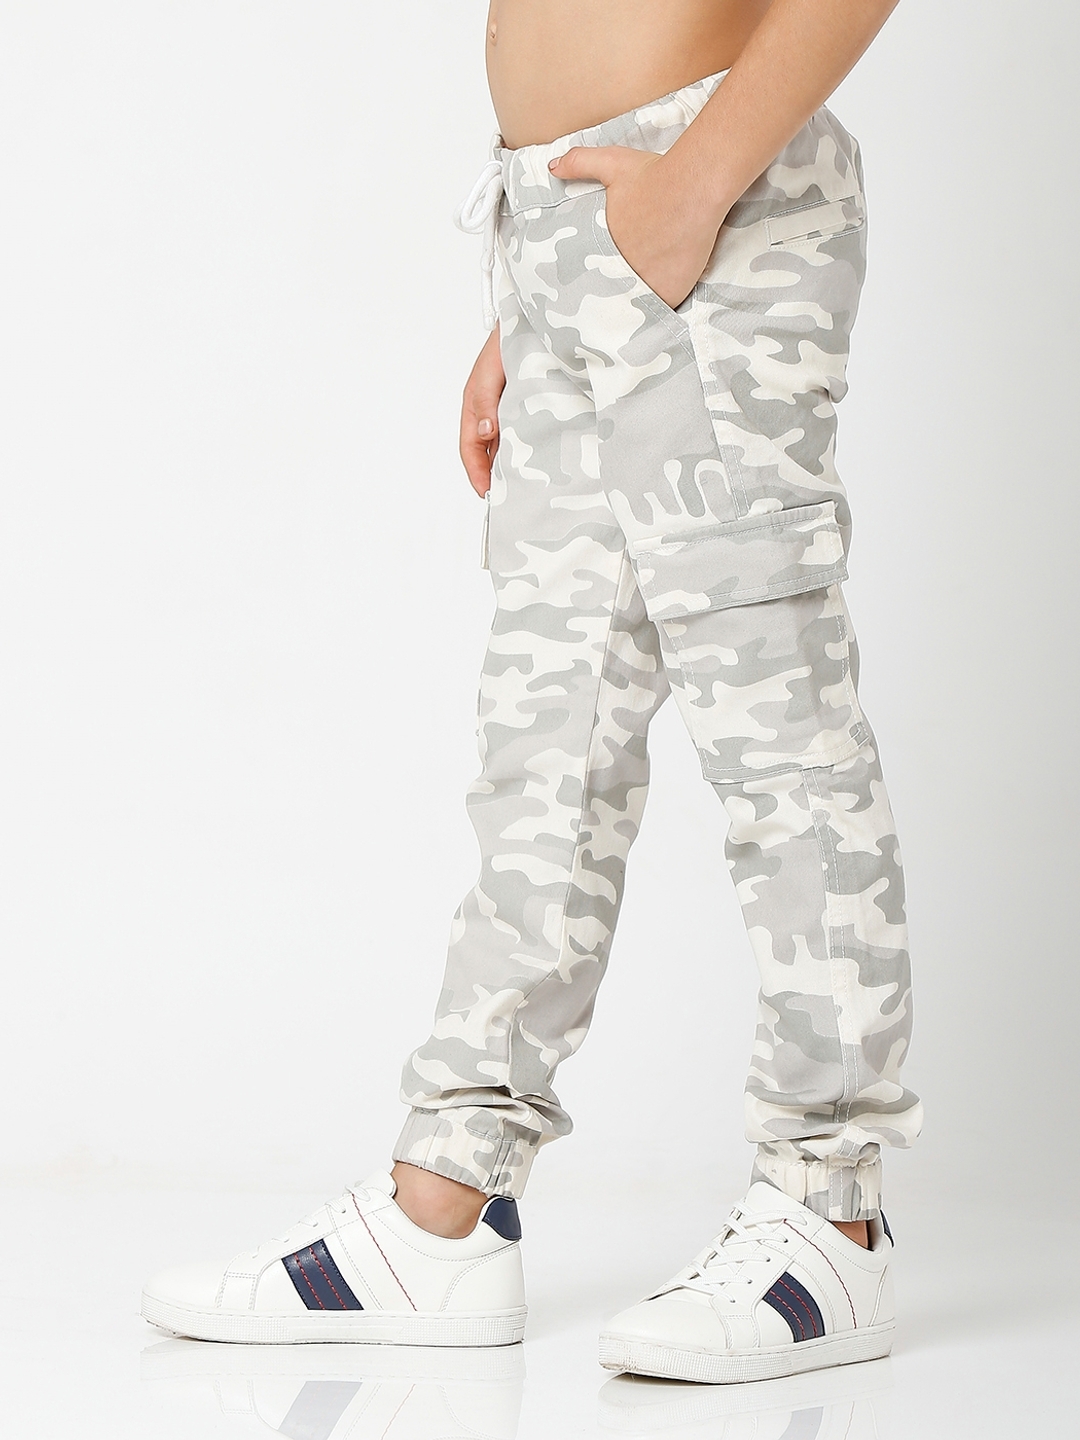 Military Cargo Pant for Men and Boys  7 Man